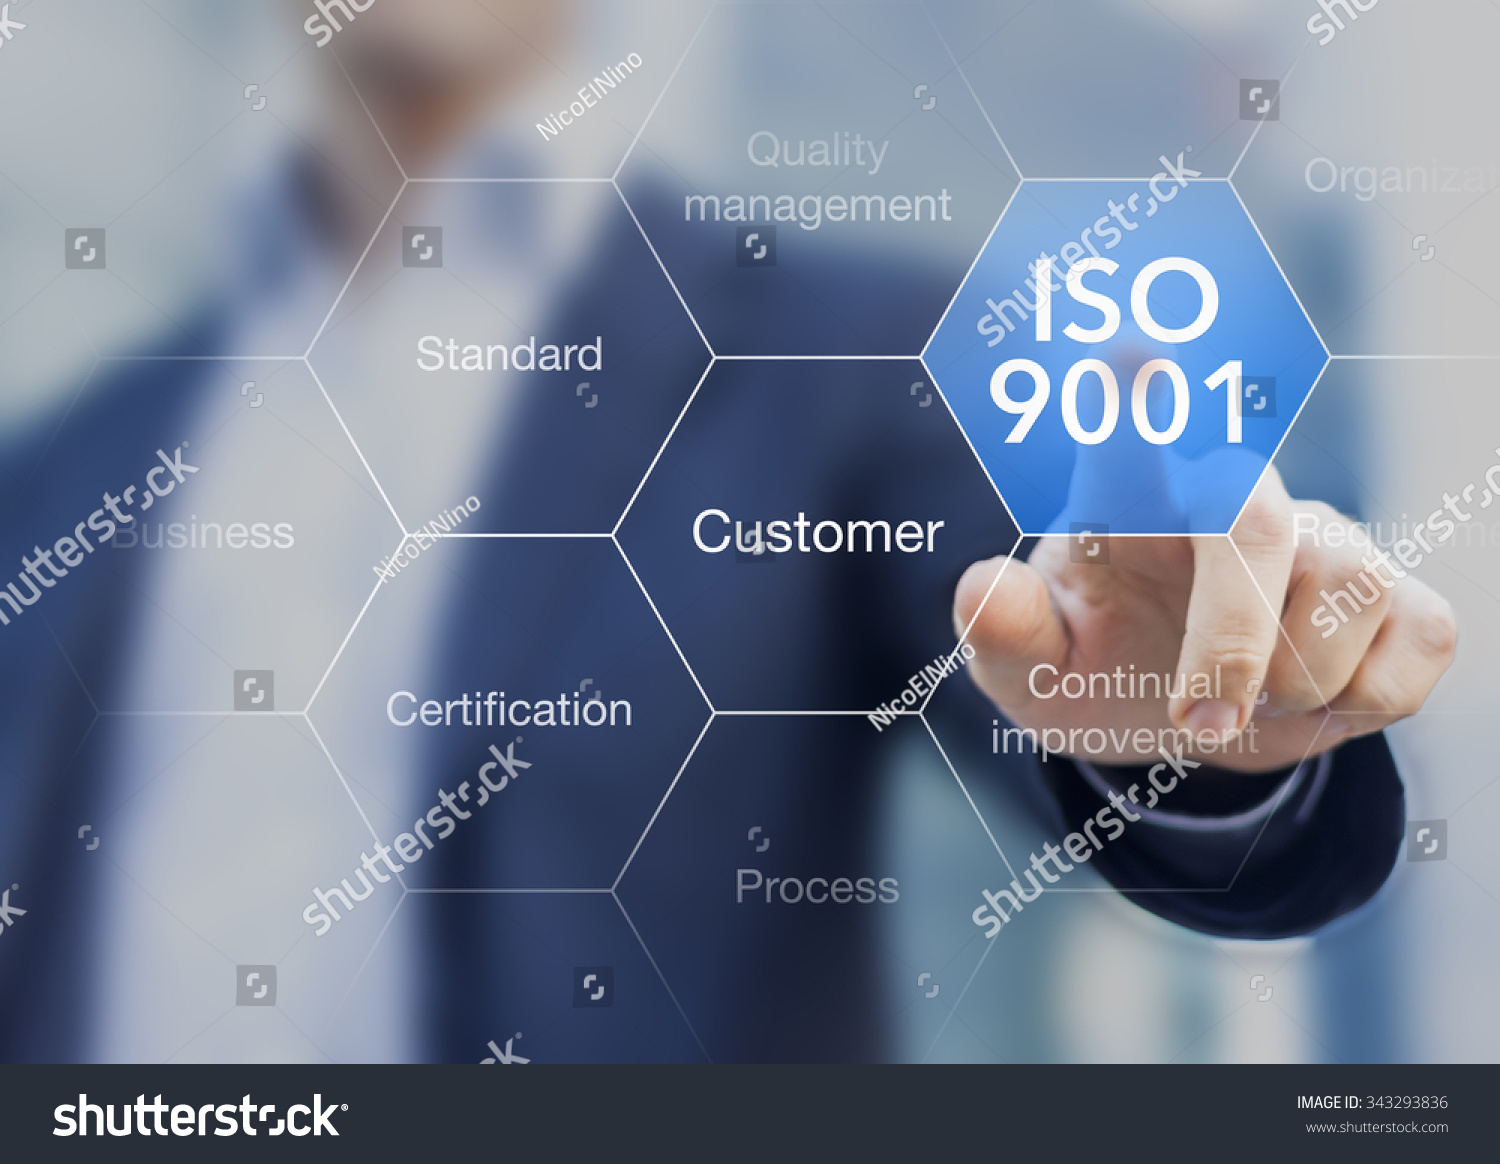 ISO 9001 standard for quality management of organizations with an auditor or manager in background #343293836